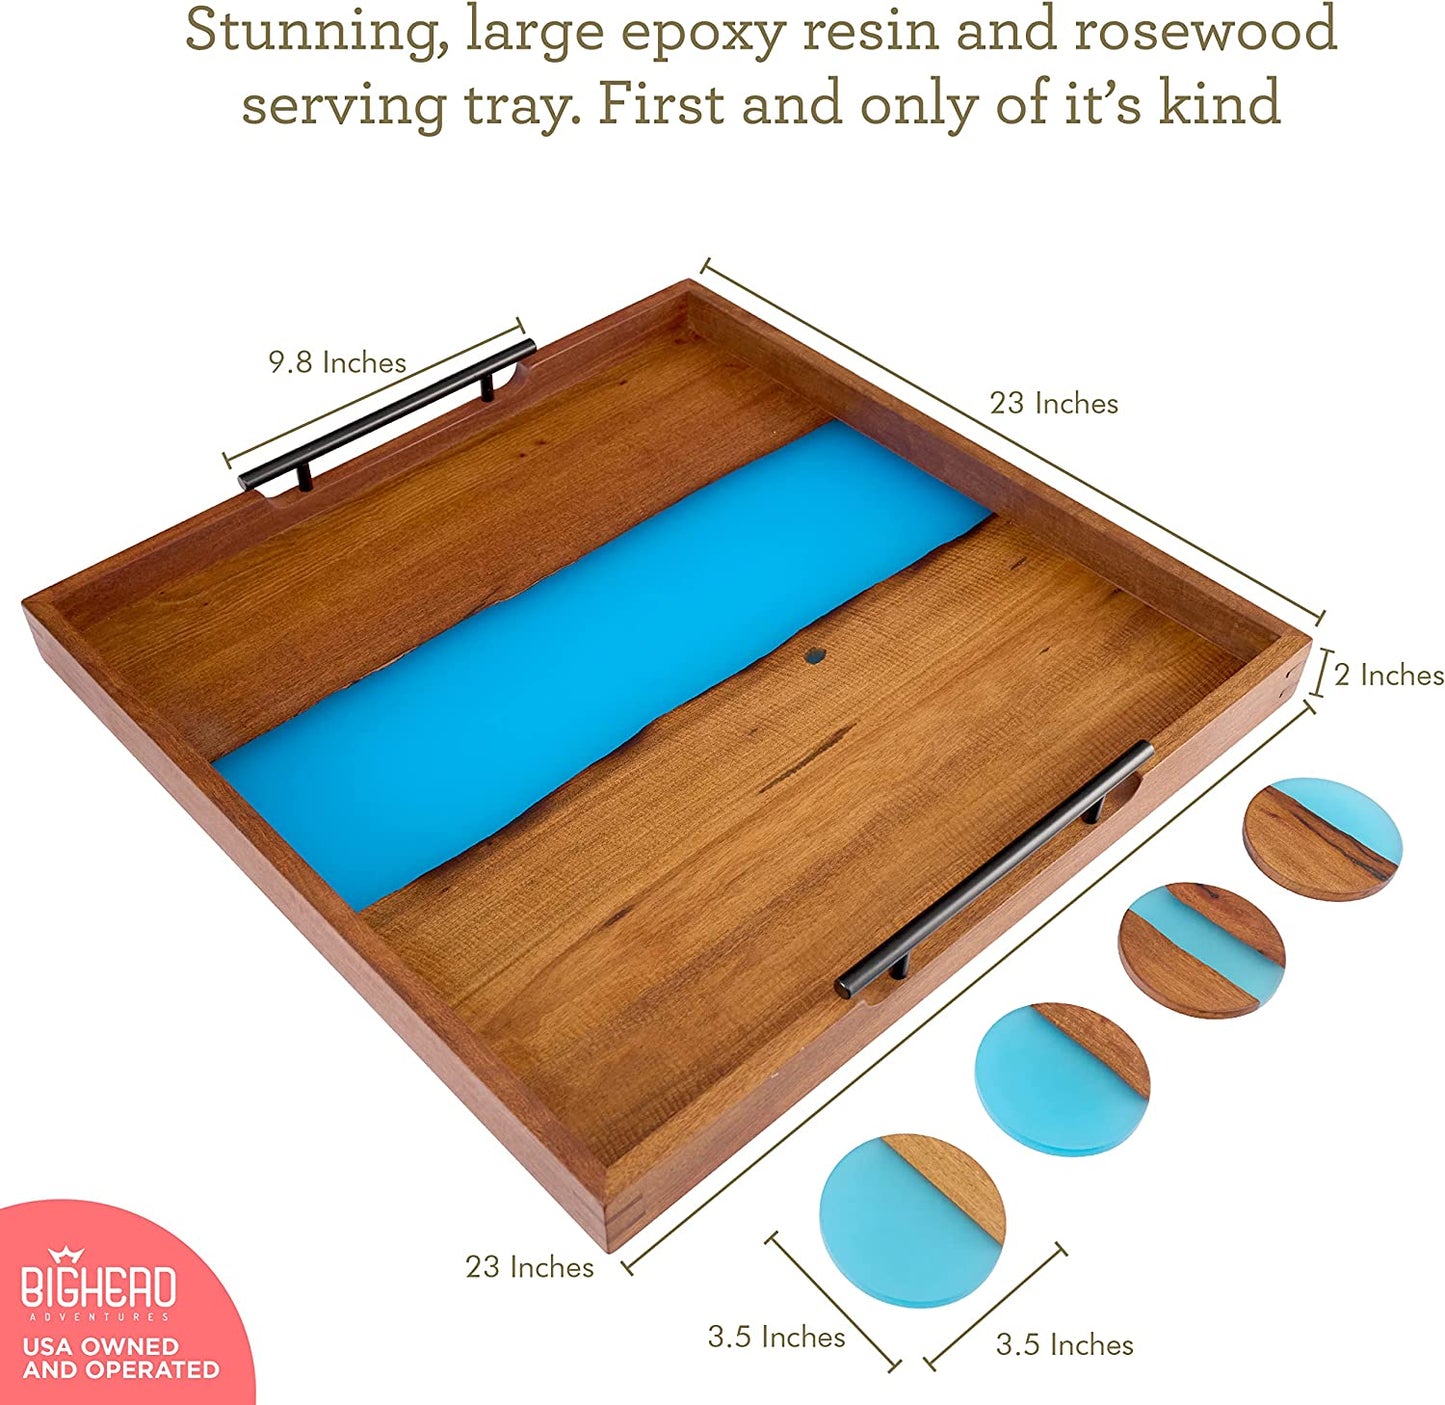 Bighead Epoxy Serving Tray Rosewood Tray with Glowing Epoxy Resin- Large Sized Epoxy Wooden Tray-Ocean Inspired Resin Serving Tray for Home Decor Coffee Tray-with 4 Coaster Set- (Luminous Blue Rosewood)